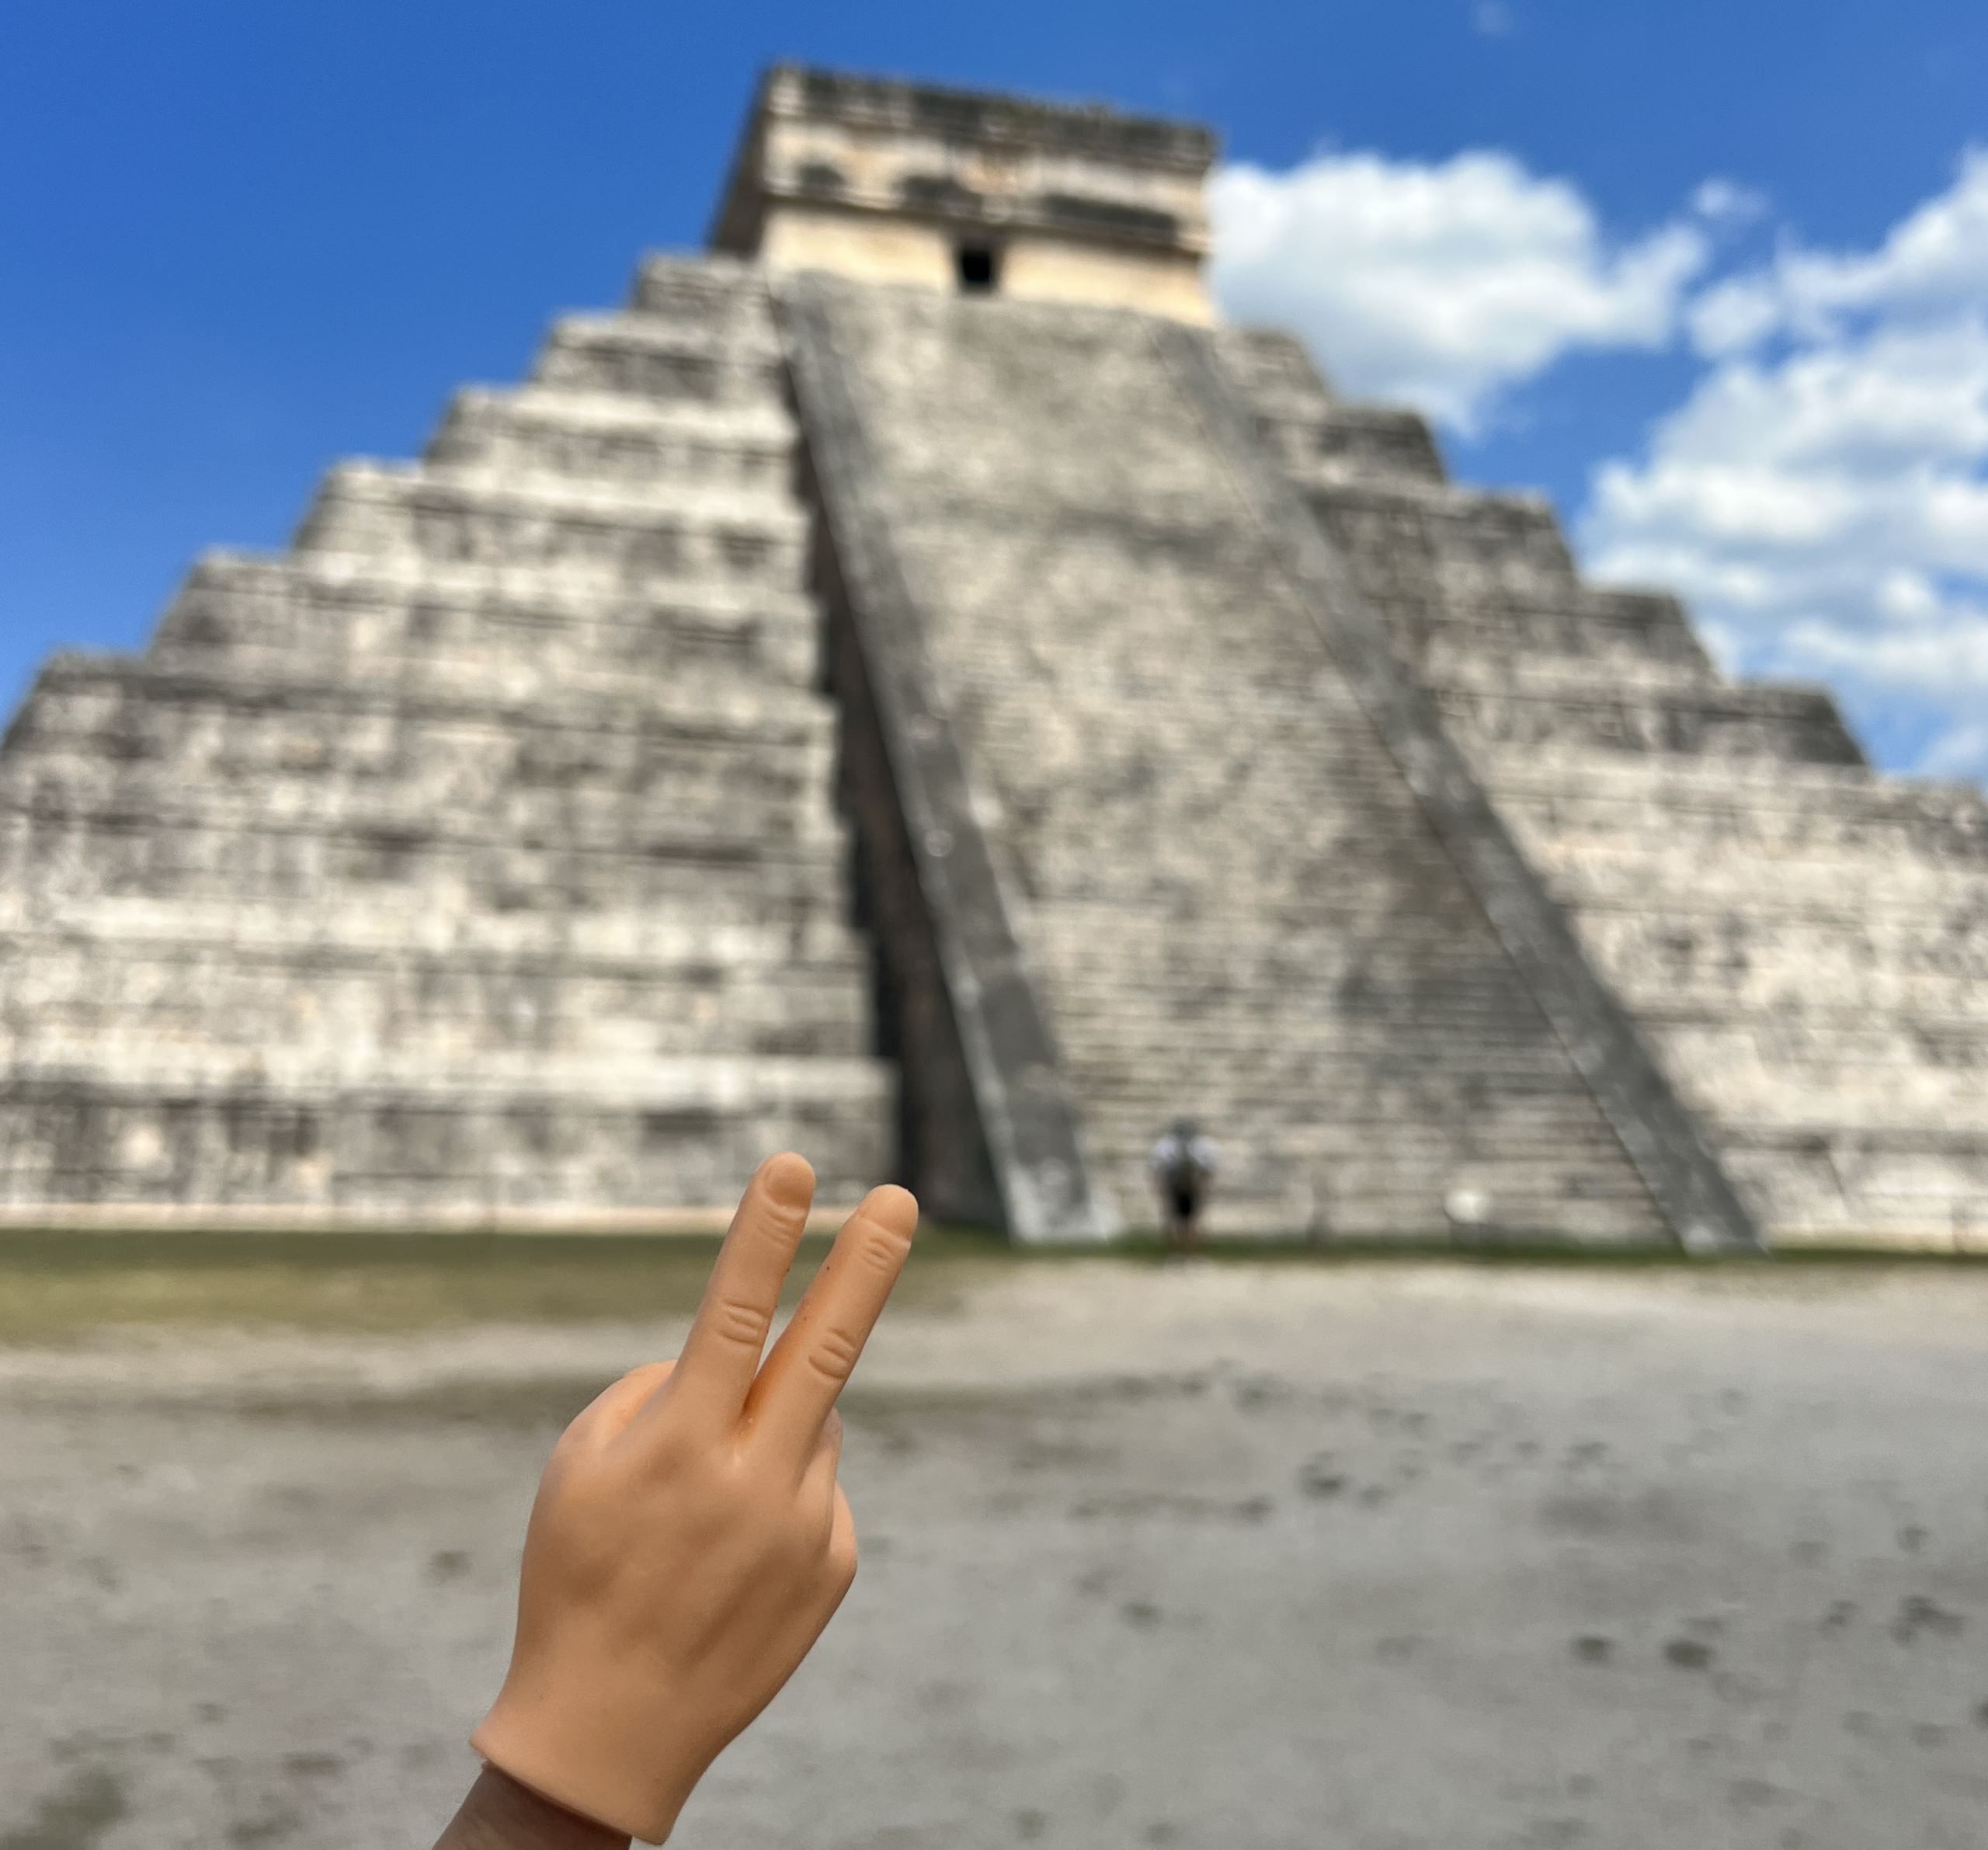 Why Did the Chichen Itza Cross the Road?